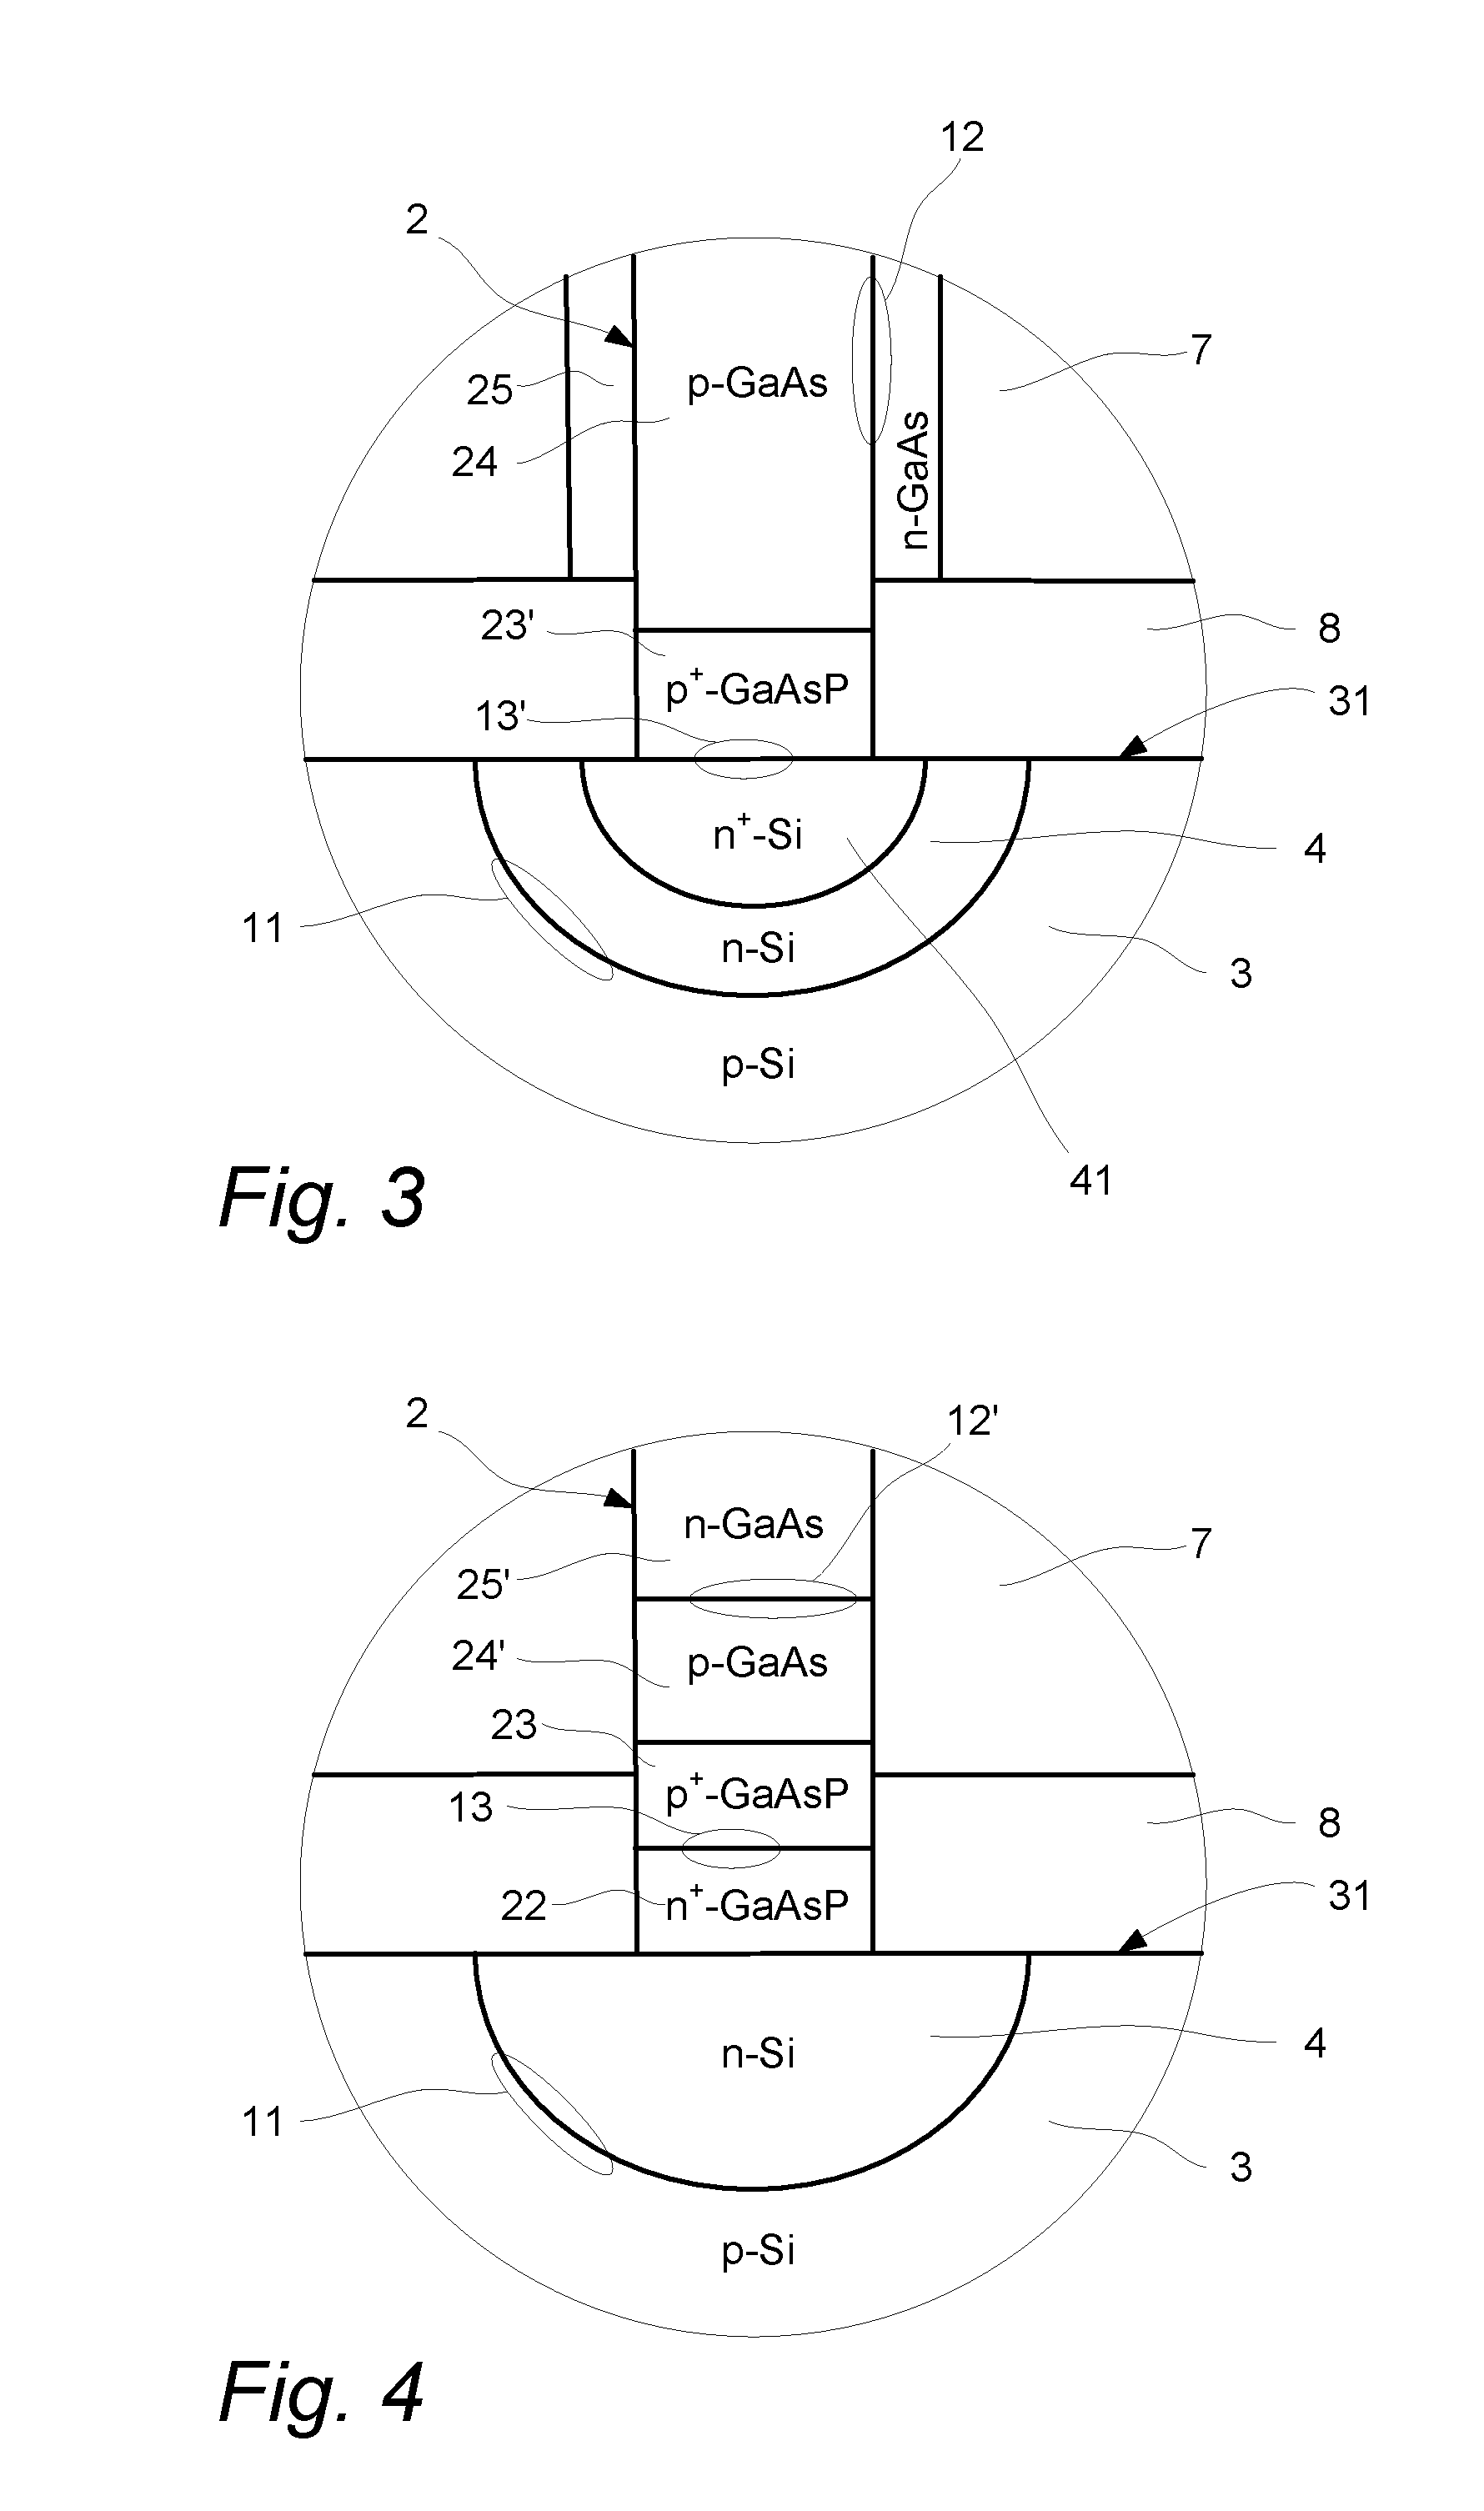 Multi-junction photovoltaic cell with nanowires